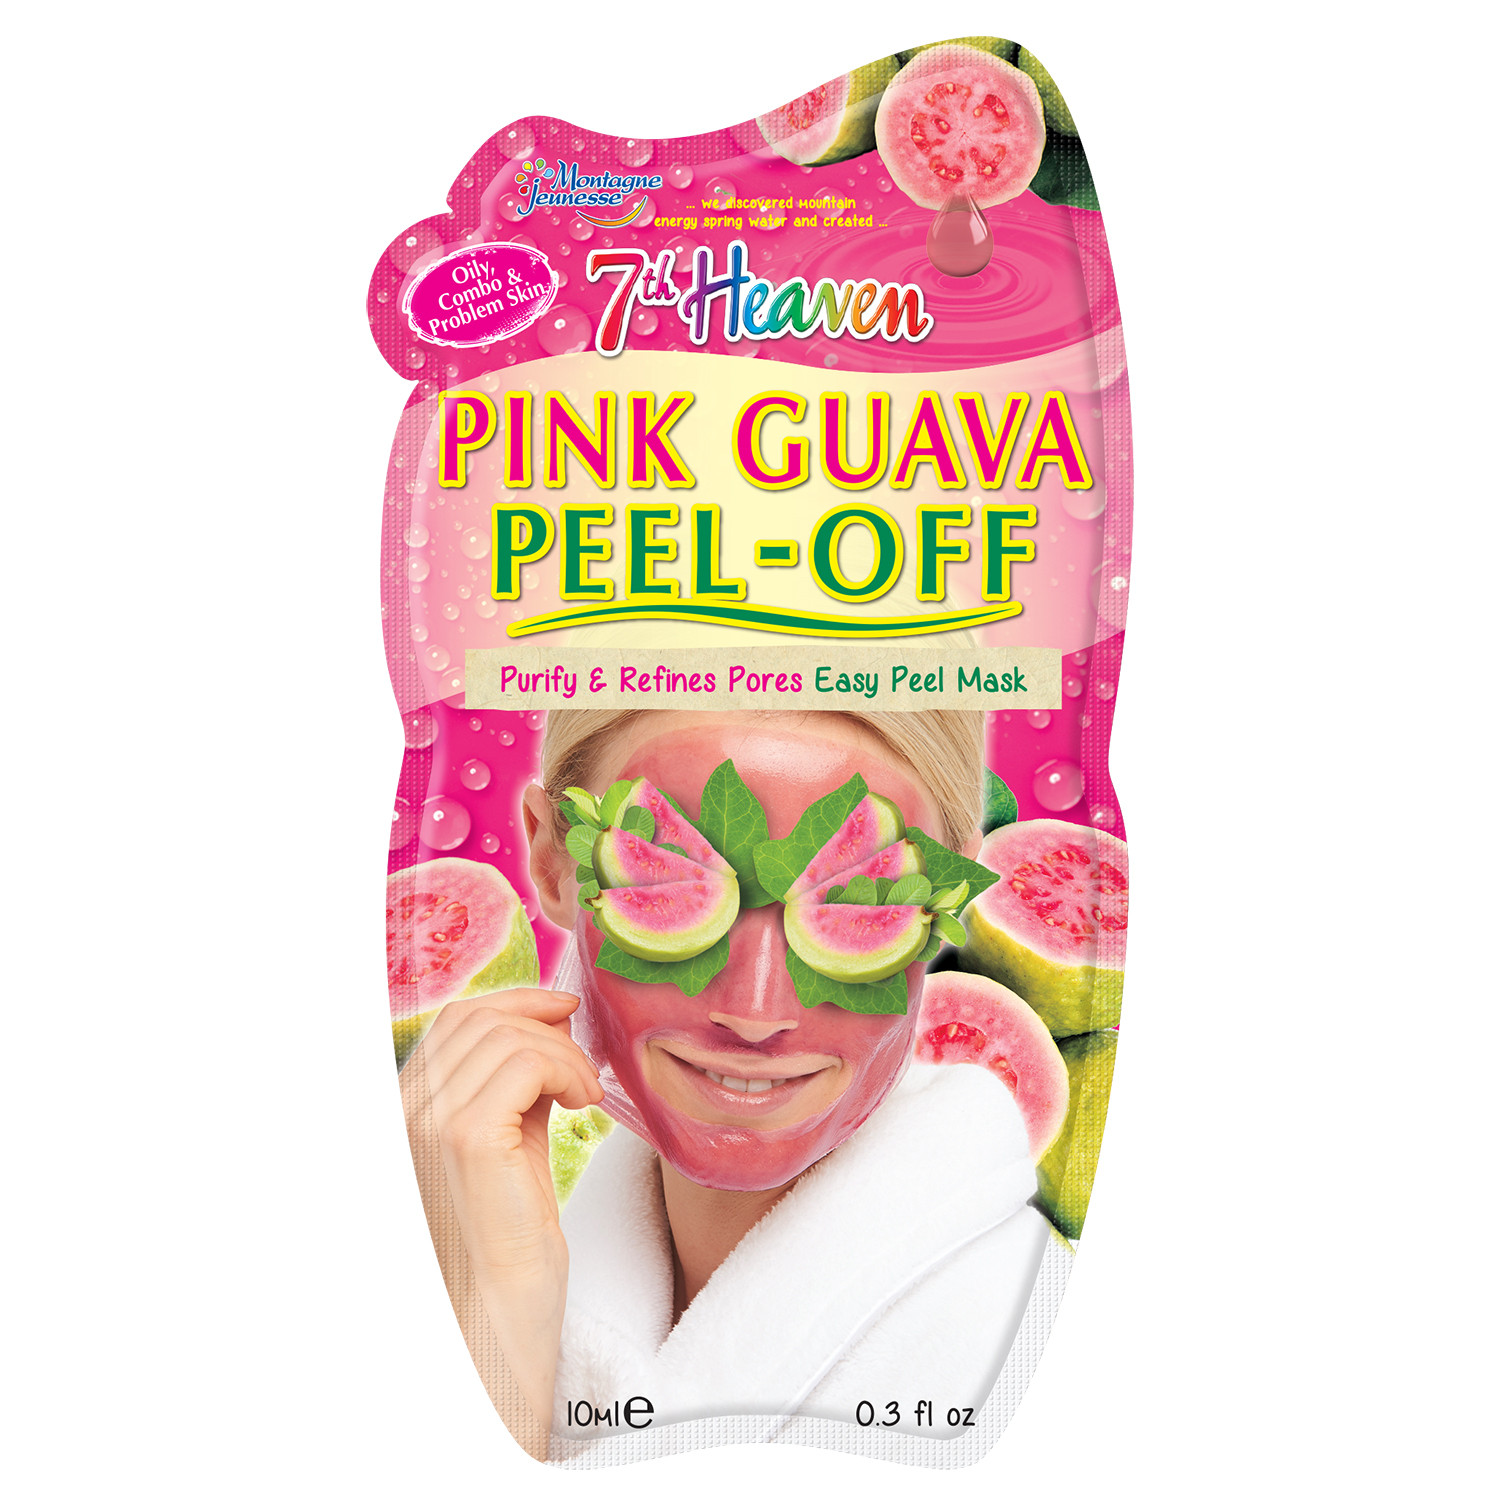 7th Heaven Pink Guava Peel-Off Purify and Refine Pores Face Mask Image 1